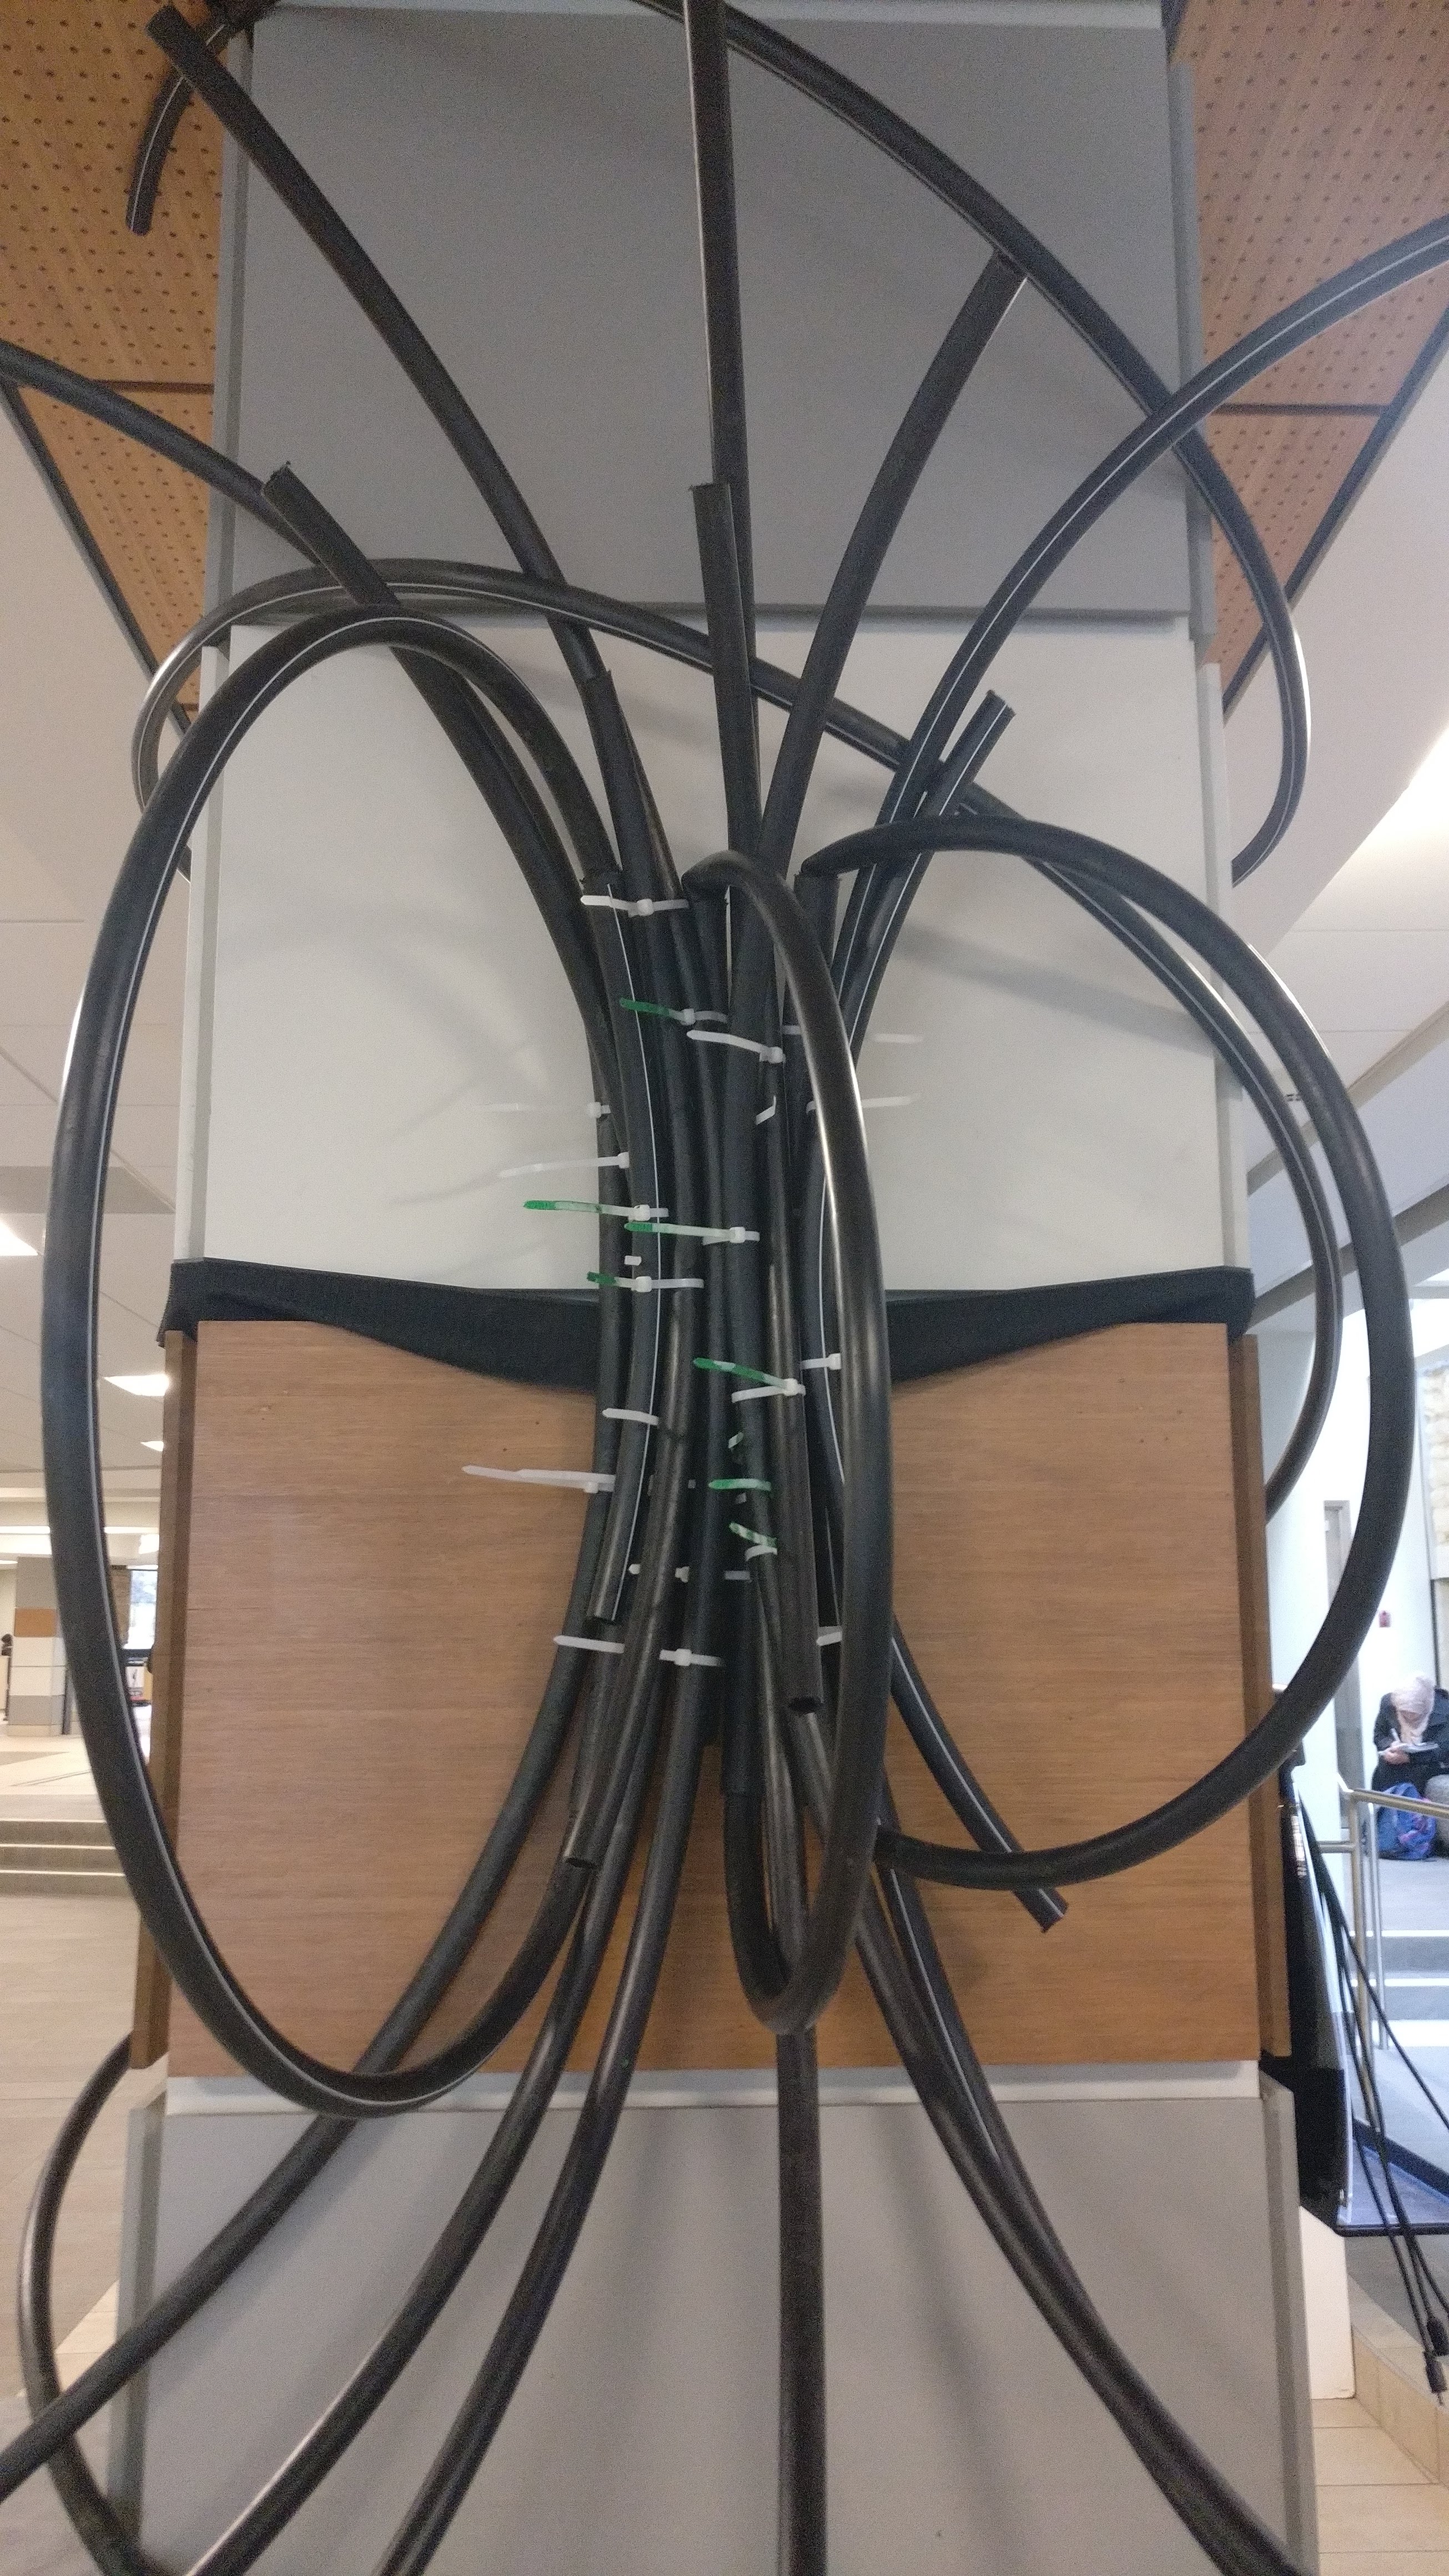 A sculpture made of reclaimed plastic tubing by Julie Dingwall for ARTCycled 2018